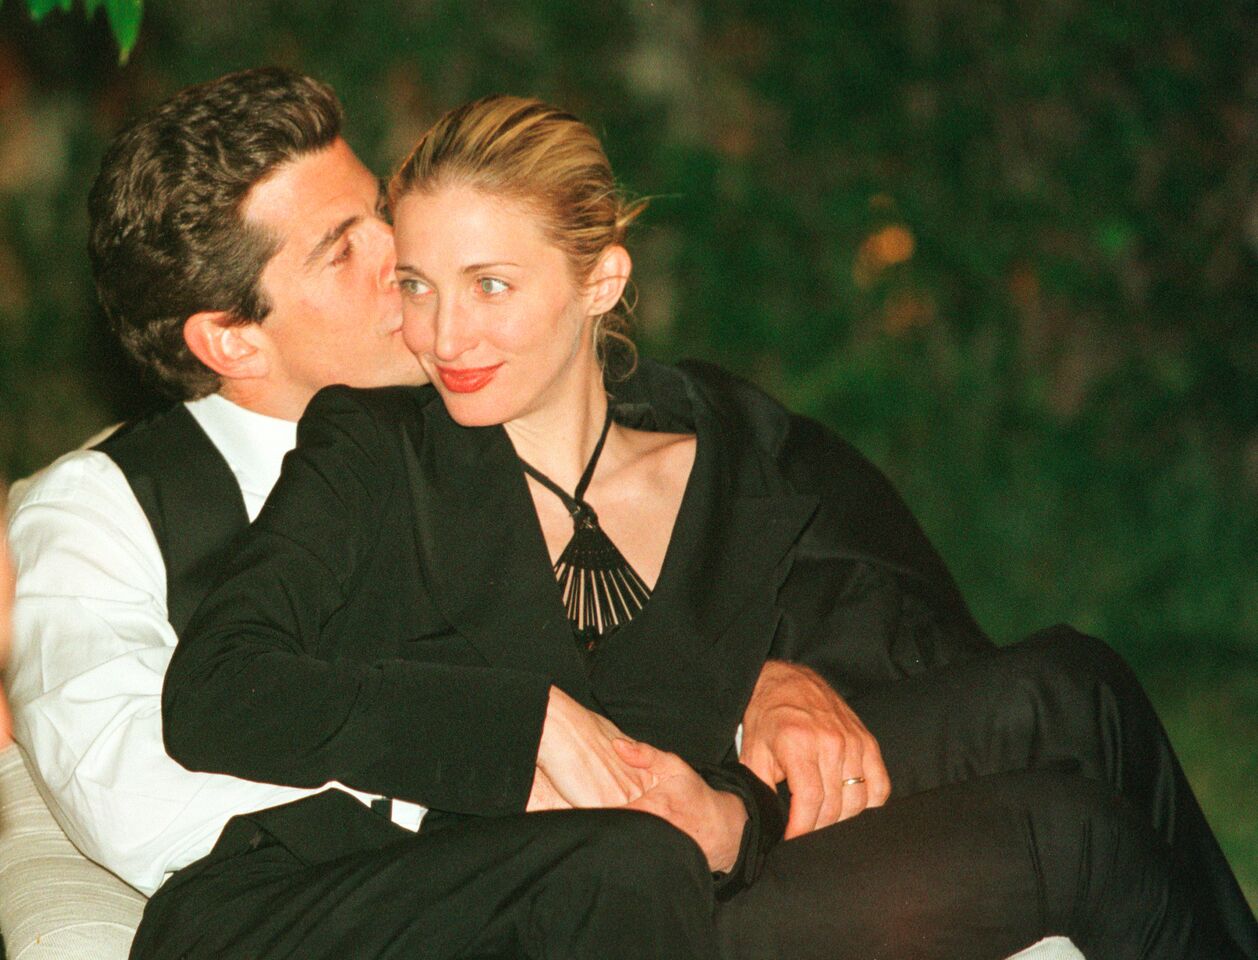 John F. Kennedy Jr. and his wife, Carolyn. | Source: Getty Images